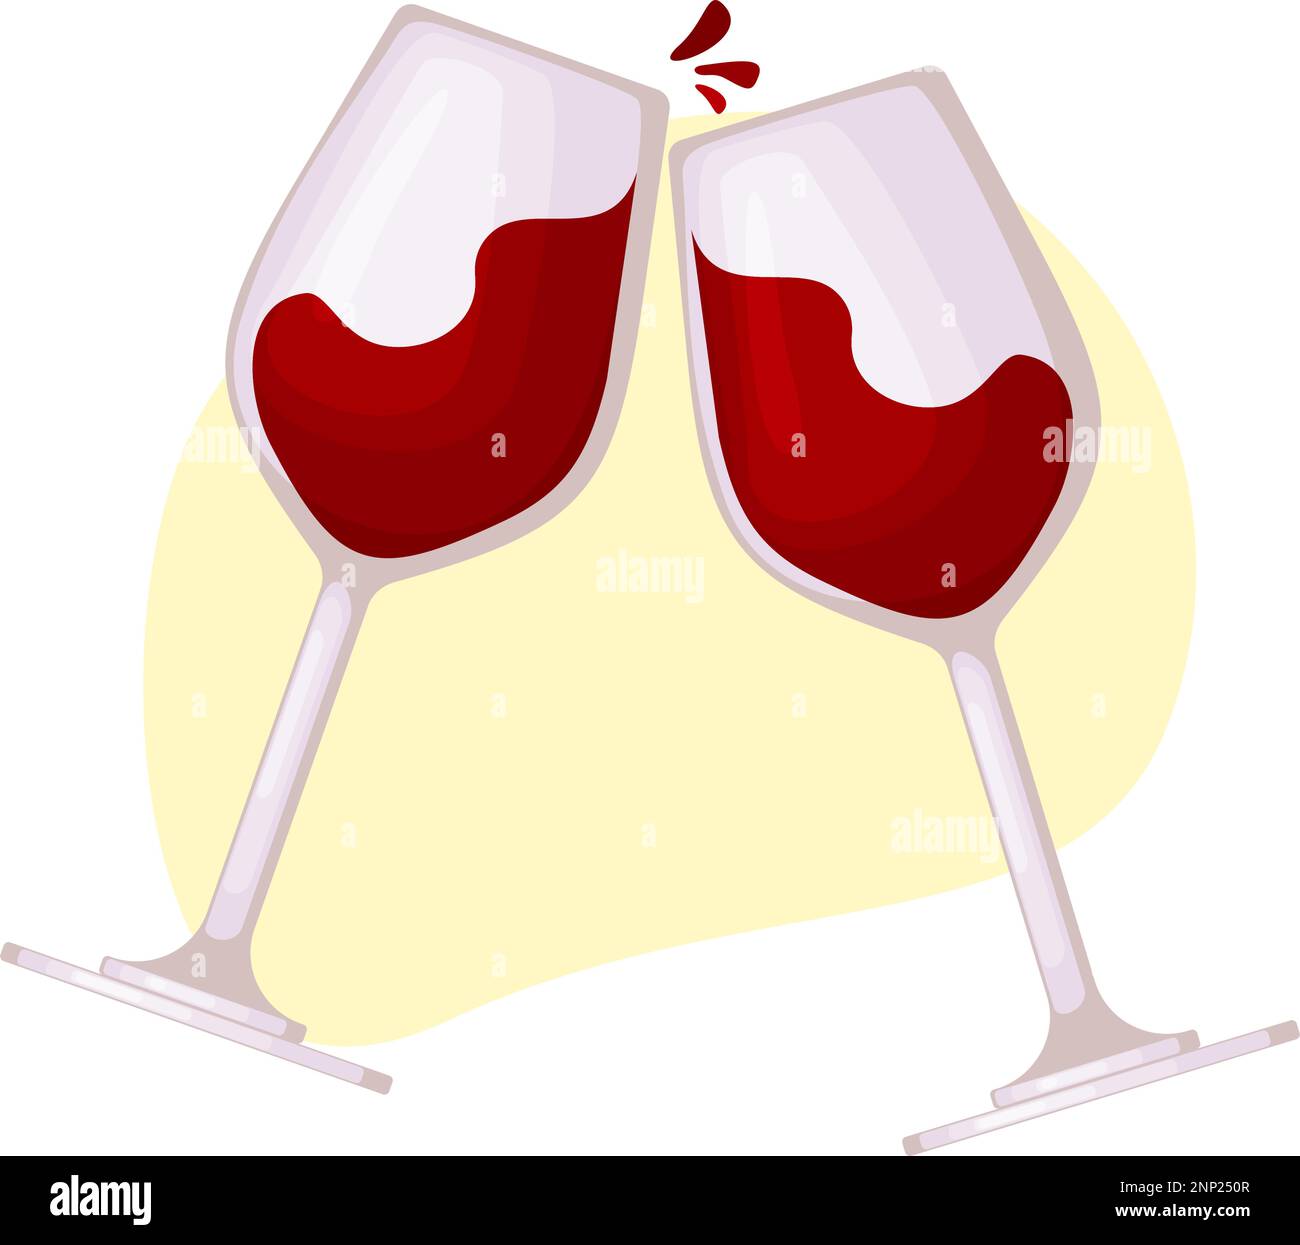 Two glasses with red wine, vector image for menu or advertising banner Stock Vector